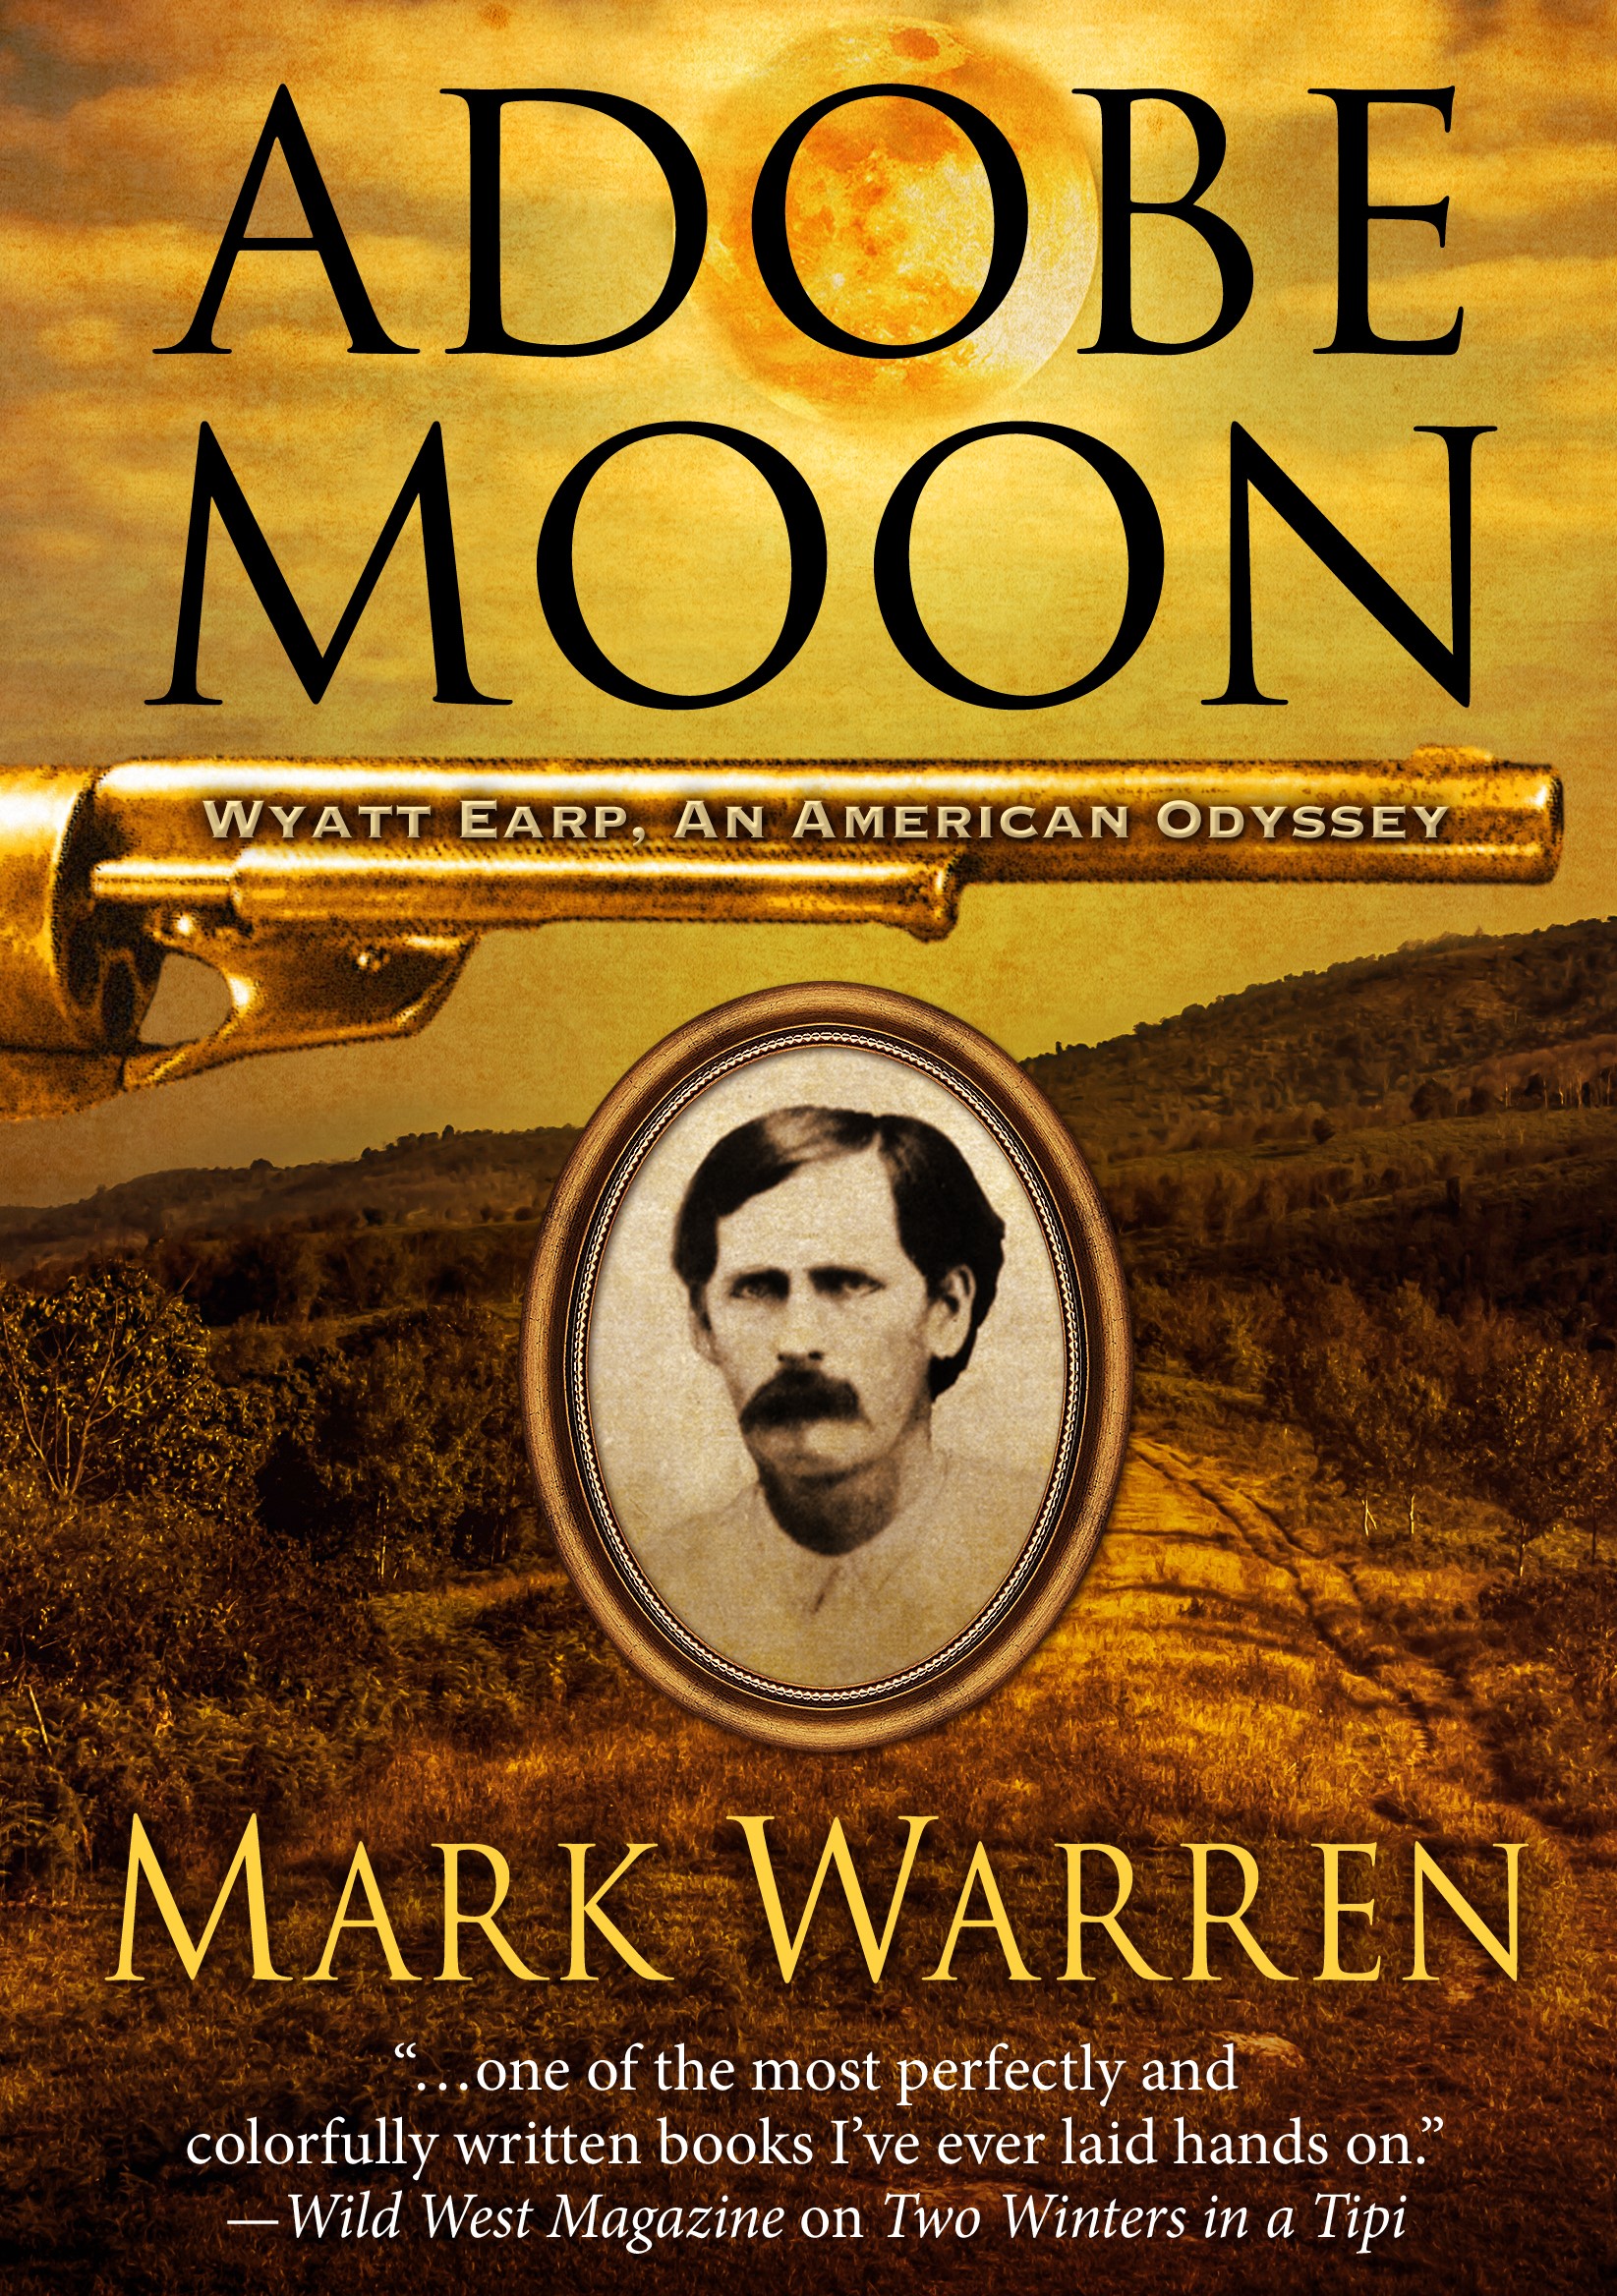 "Historical fiction can be a delight, and Warren delivers.”  ~ Casey Tefertiller, author of Wyatt Earp, the Life Behind the Legend